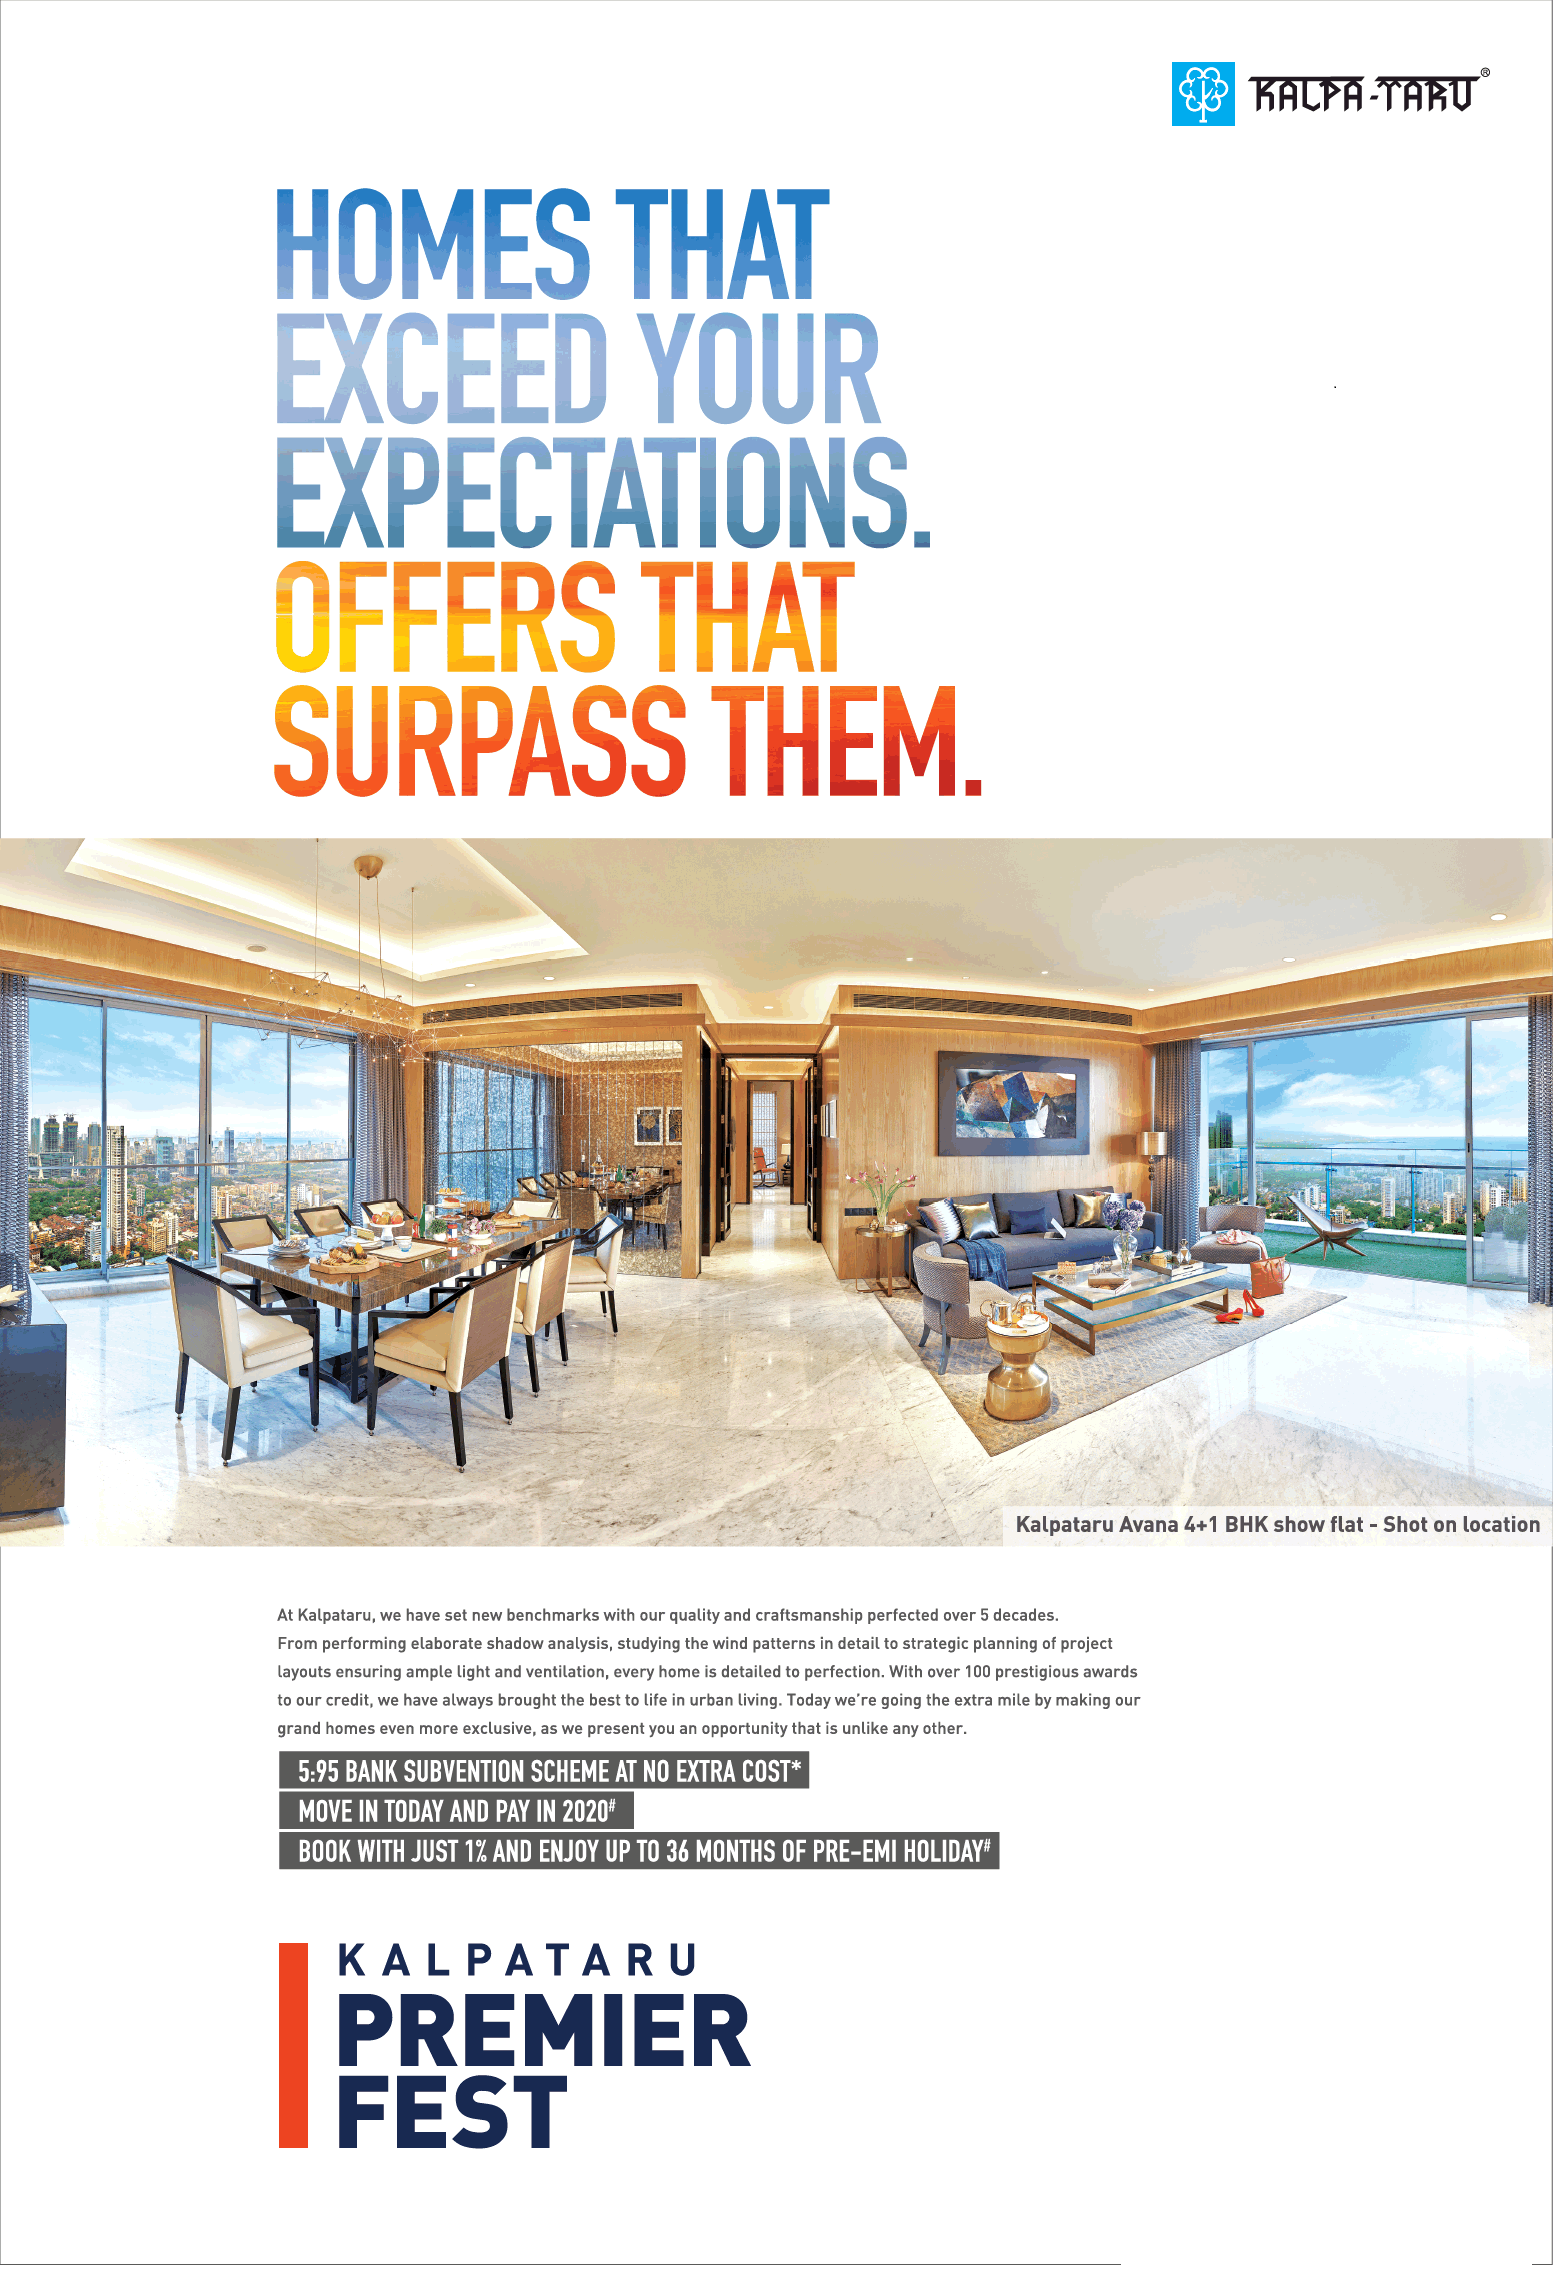 Kalpataru provides homes that exceed your expectations offers that surpass them in Noida Update